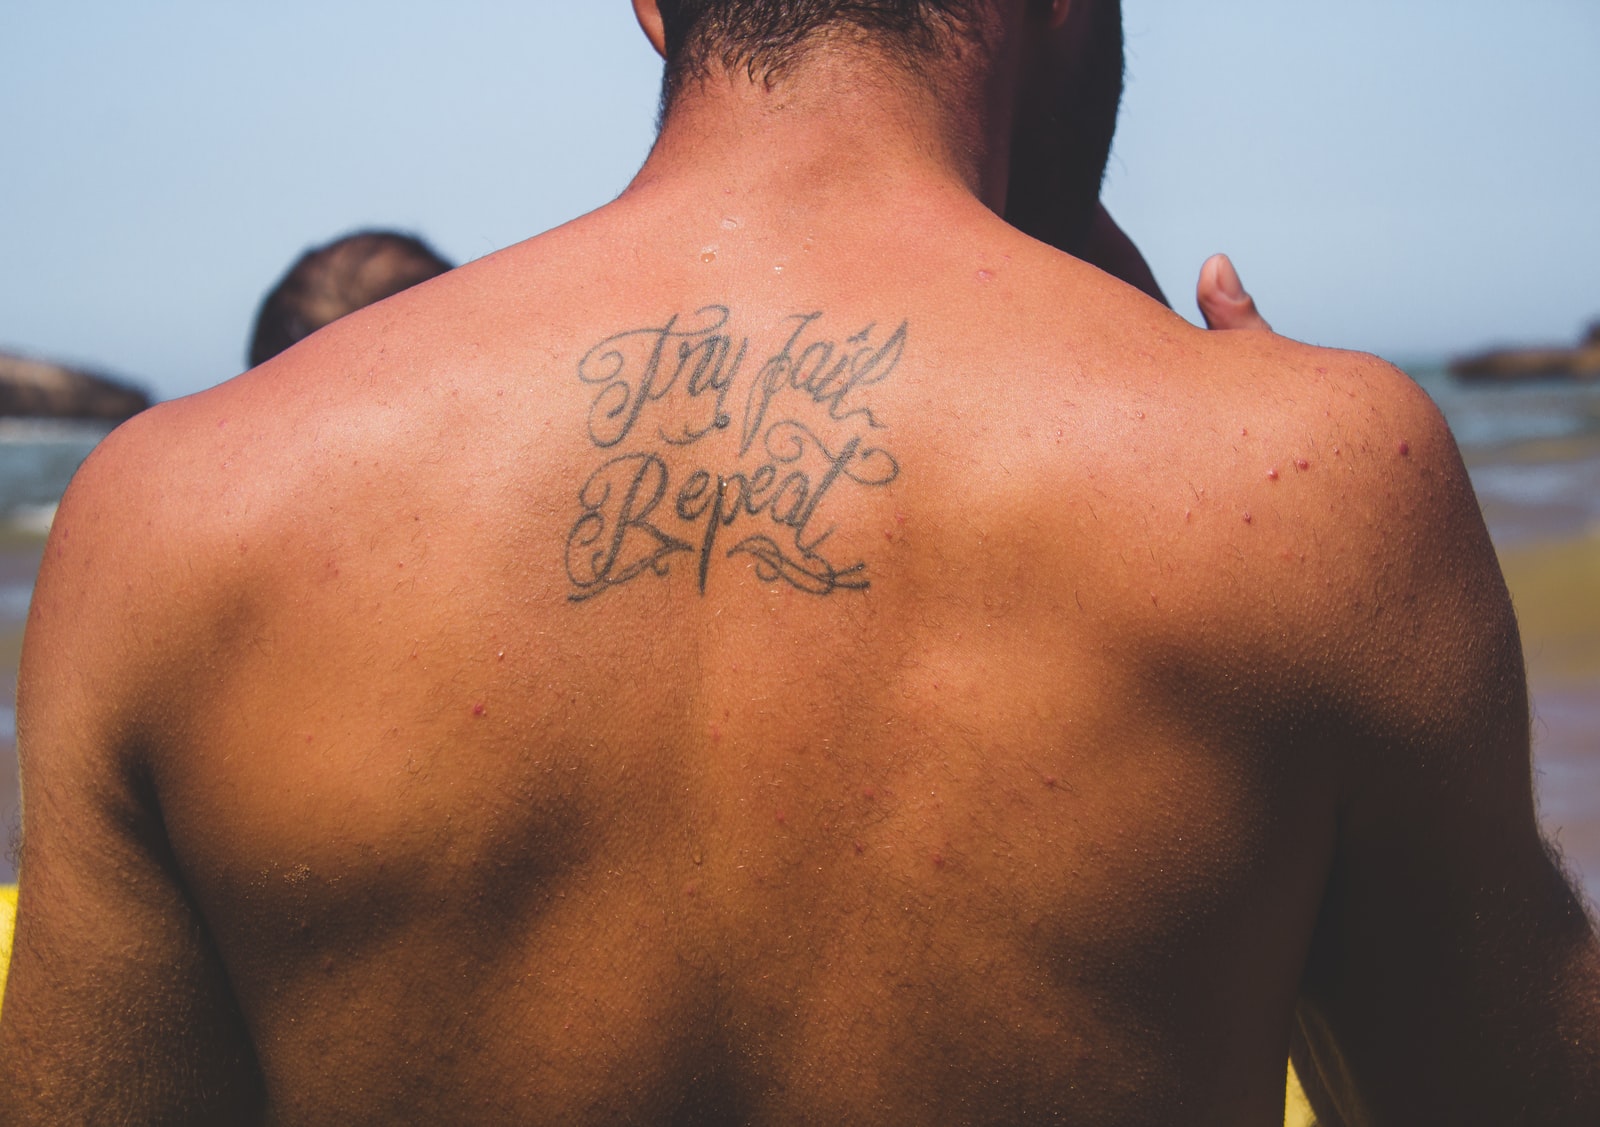 Sun Exposure and Tattoo Removal